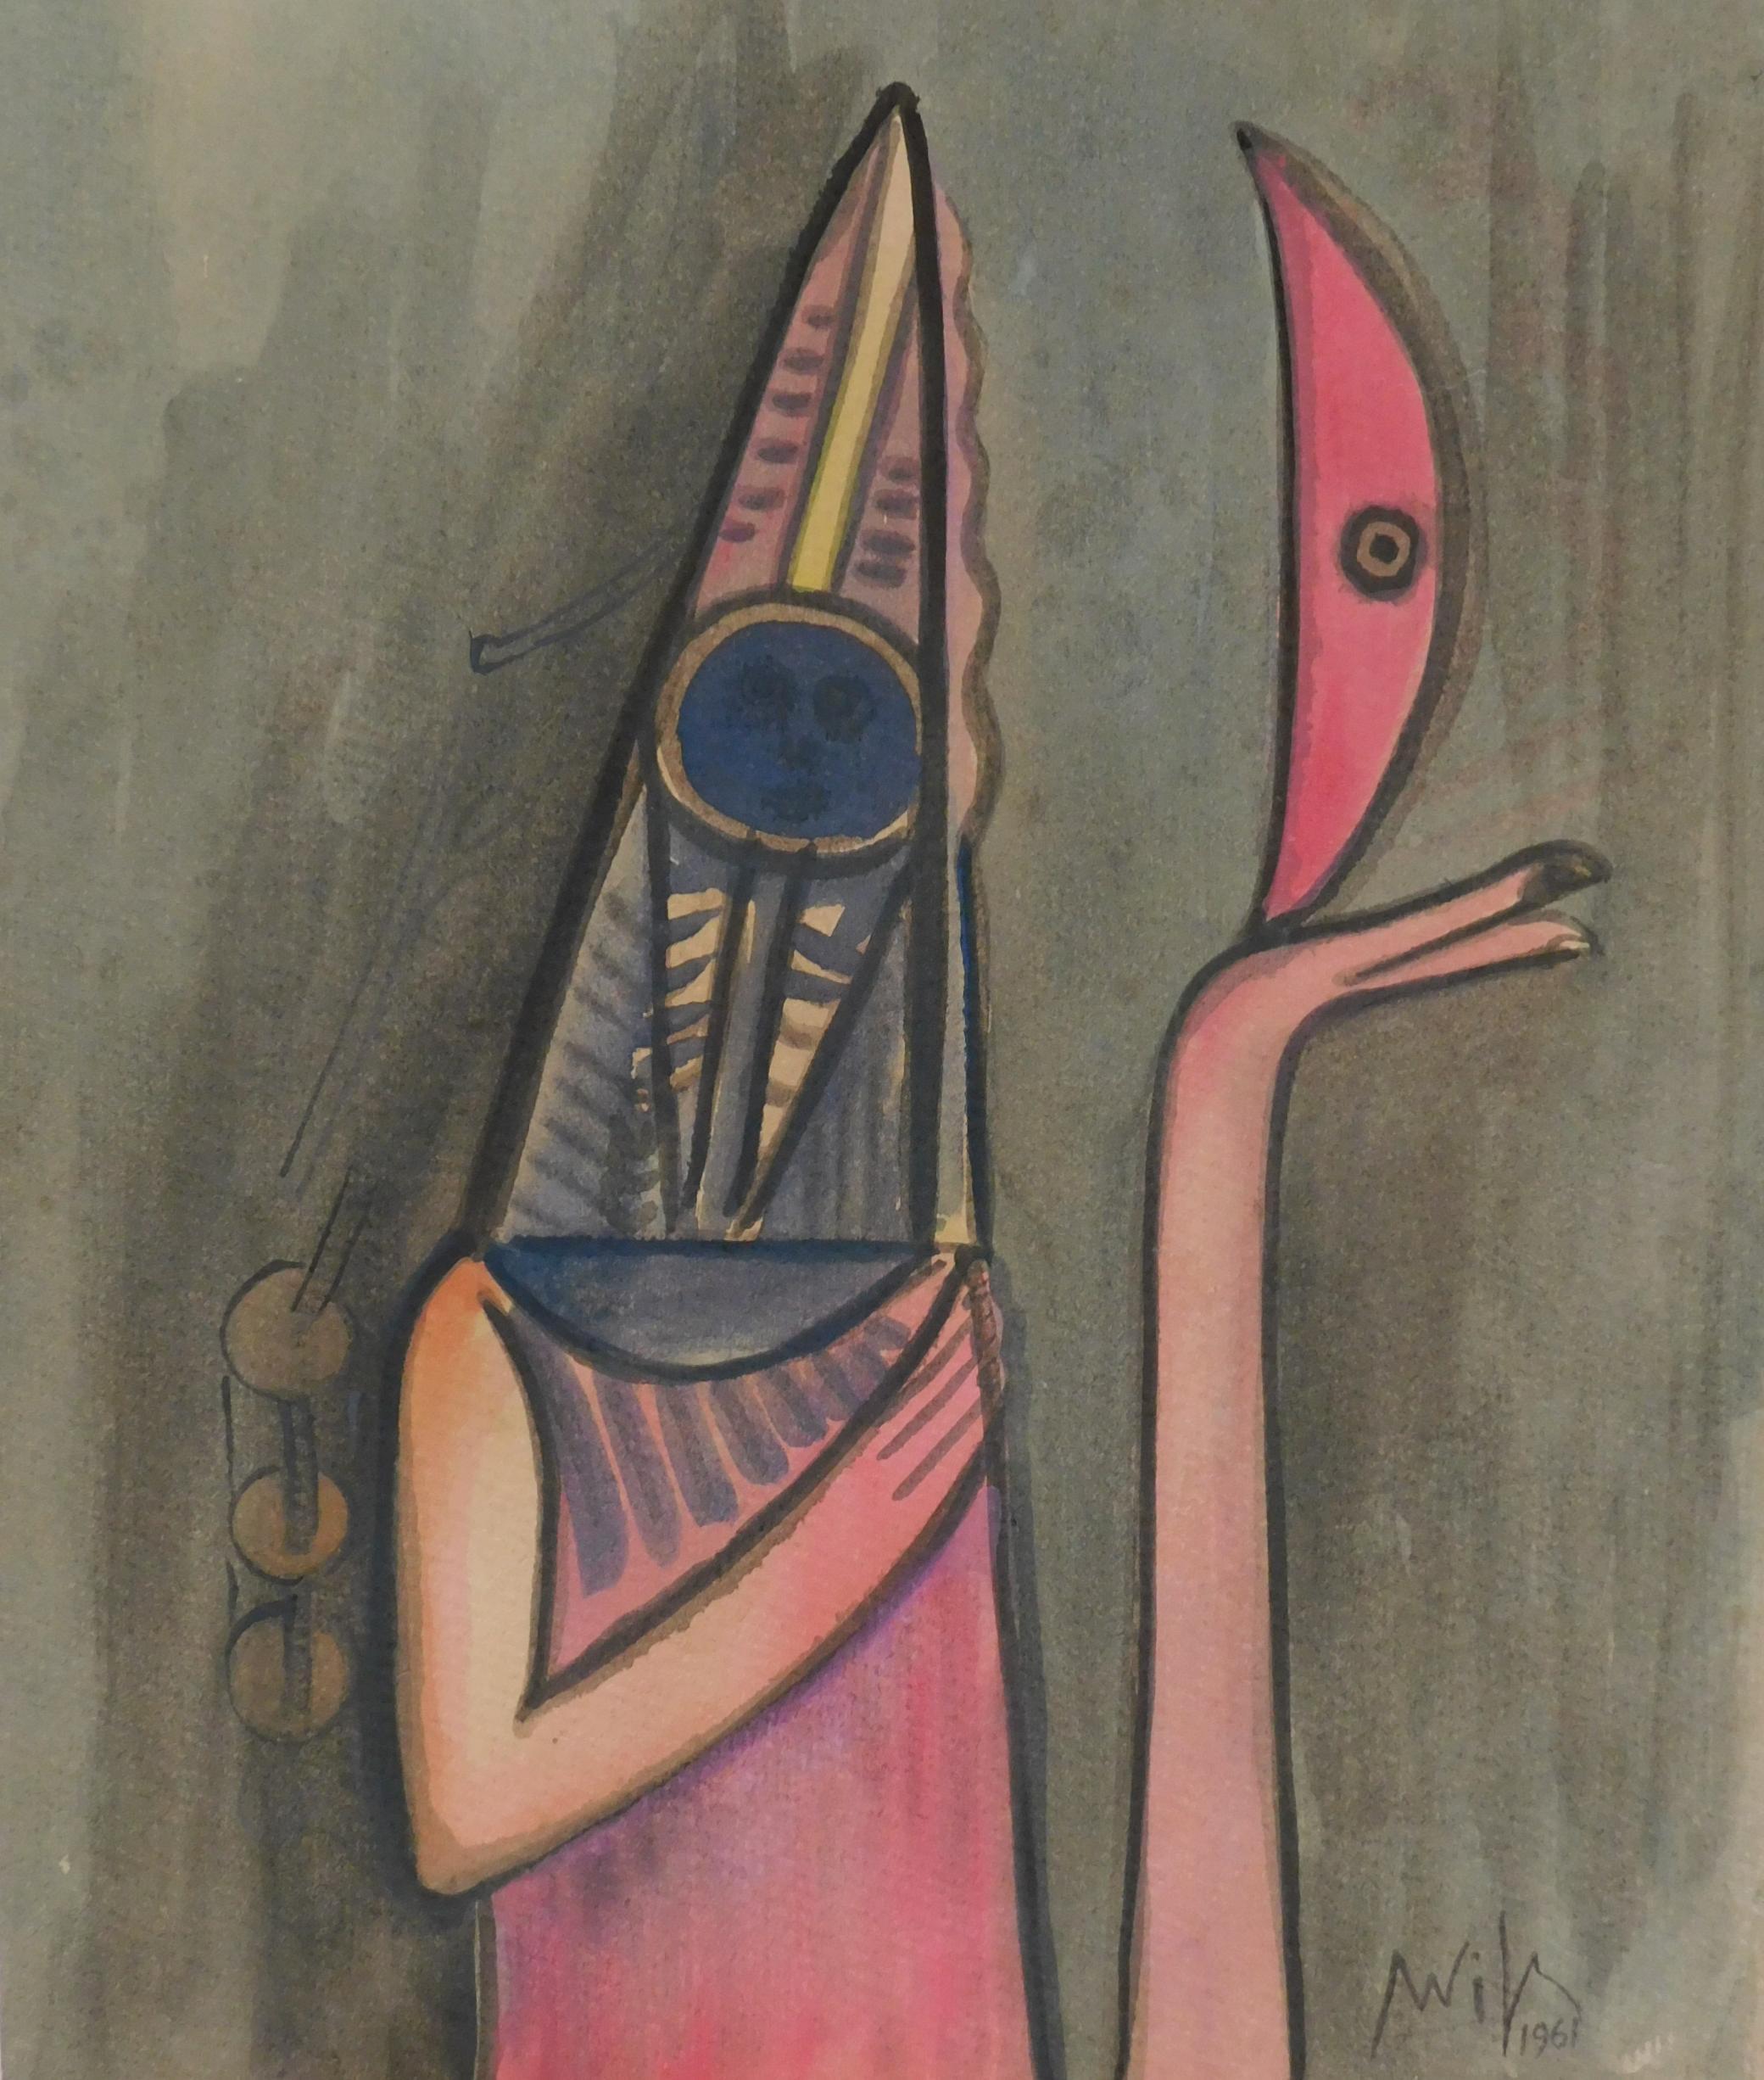  This original watercolor by Cuban artist Wifredo Lam is in excellent condition and measures 12